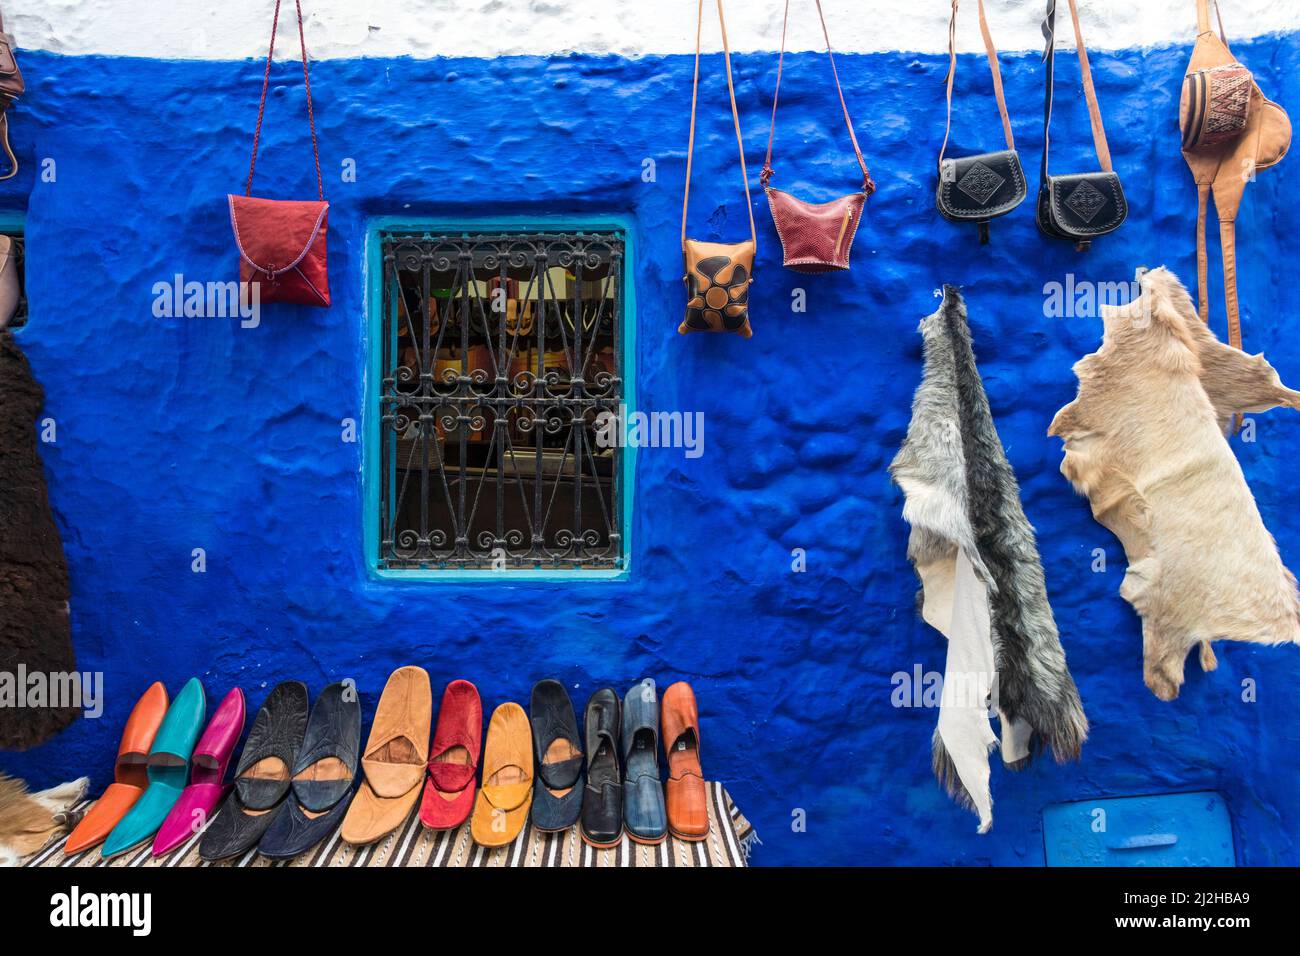 Morocco, Chefchaouen, Souvenirs for sale at traditional blue building Stock Photo